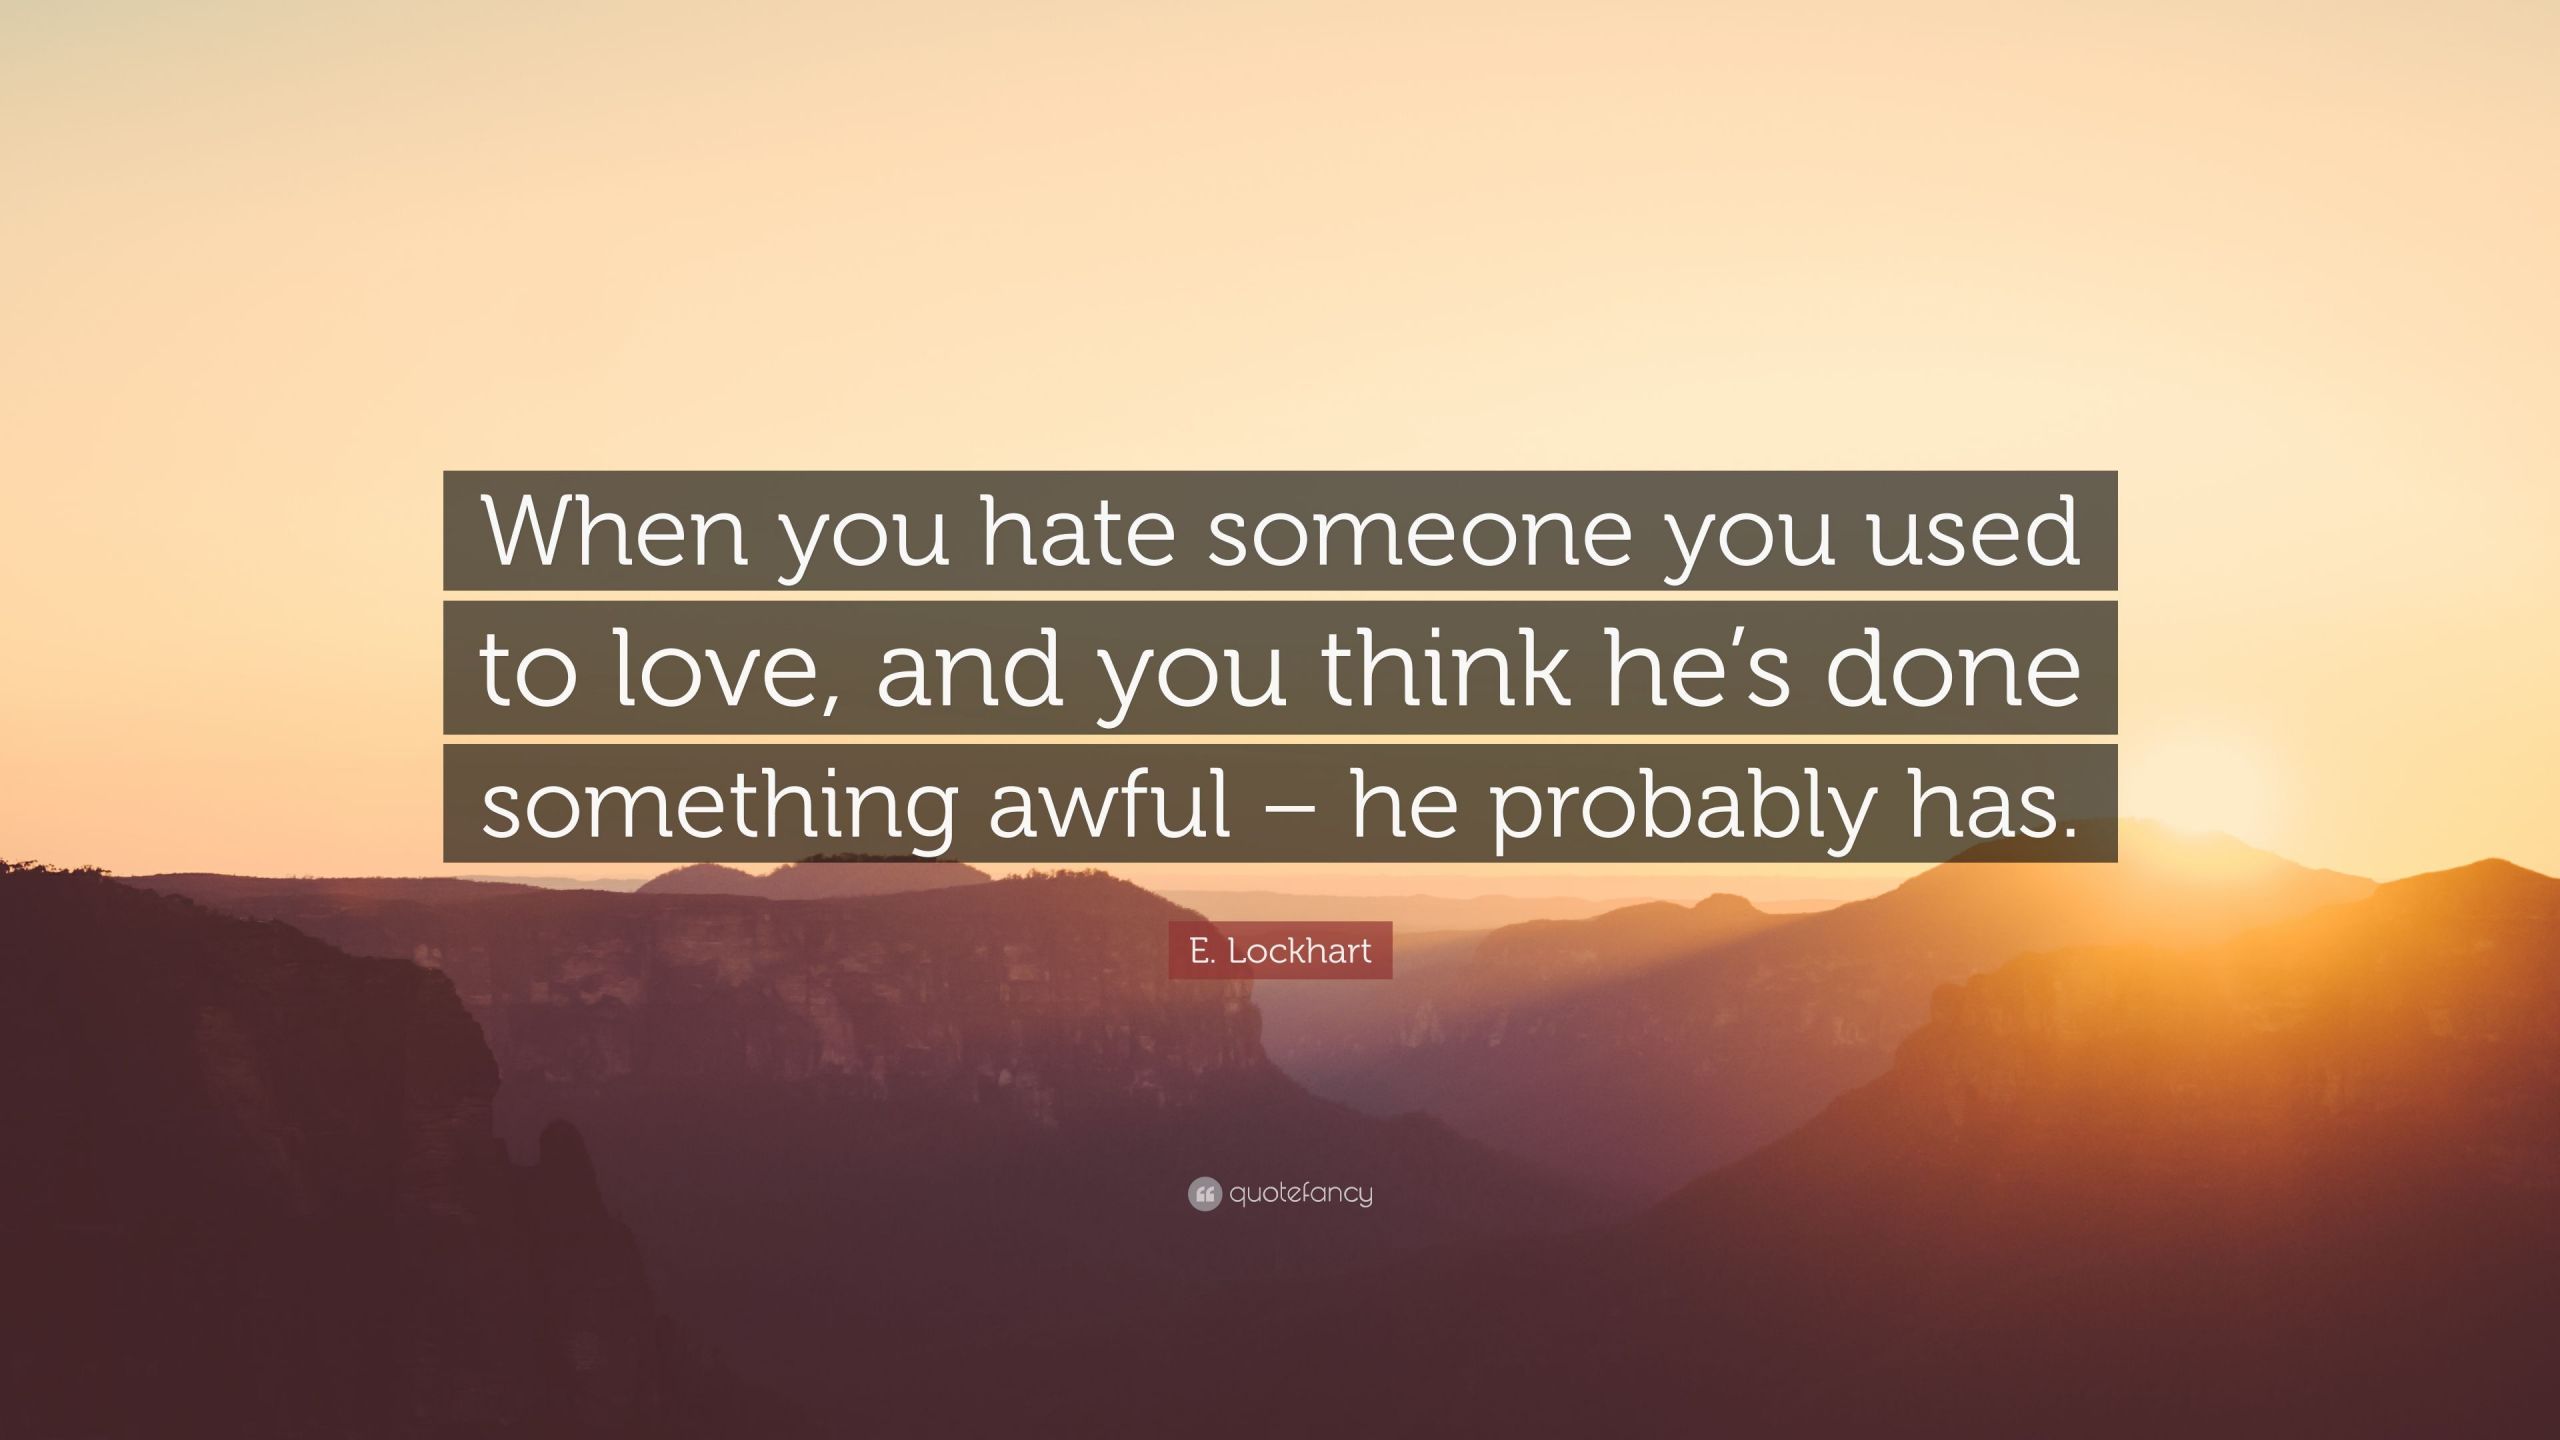 Quotes About Hating Someone You Used To Love
 E Lockhart Quote “When you hate someone you used to love